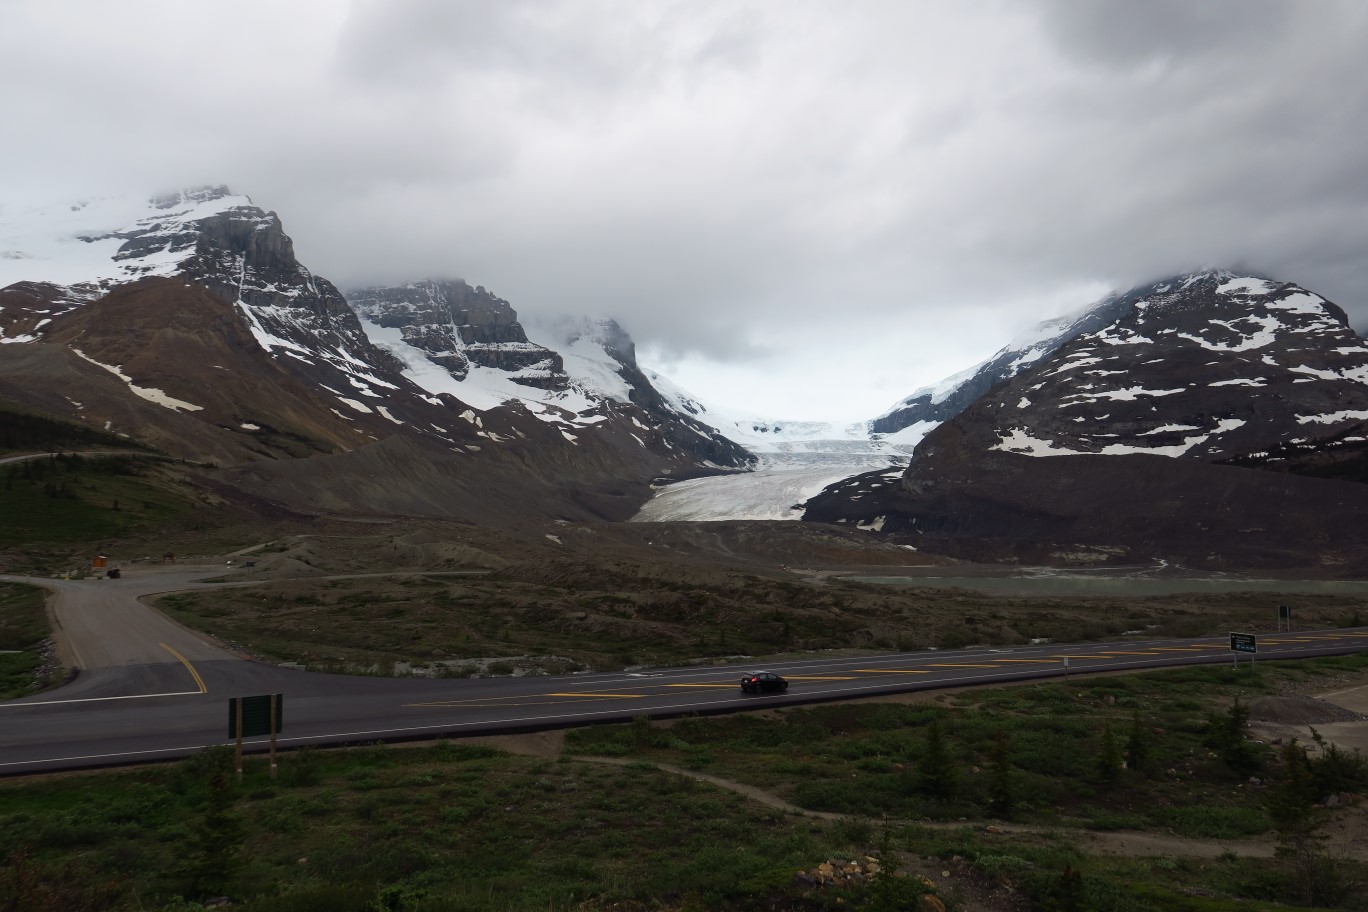 002-Athabasca_Glacier_from_Columbia_Icefield_Centre